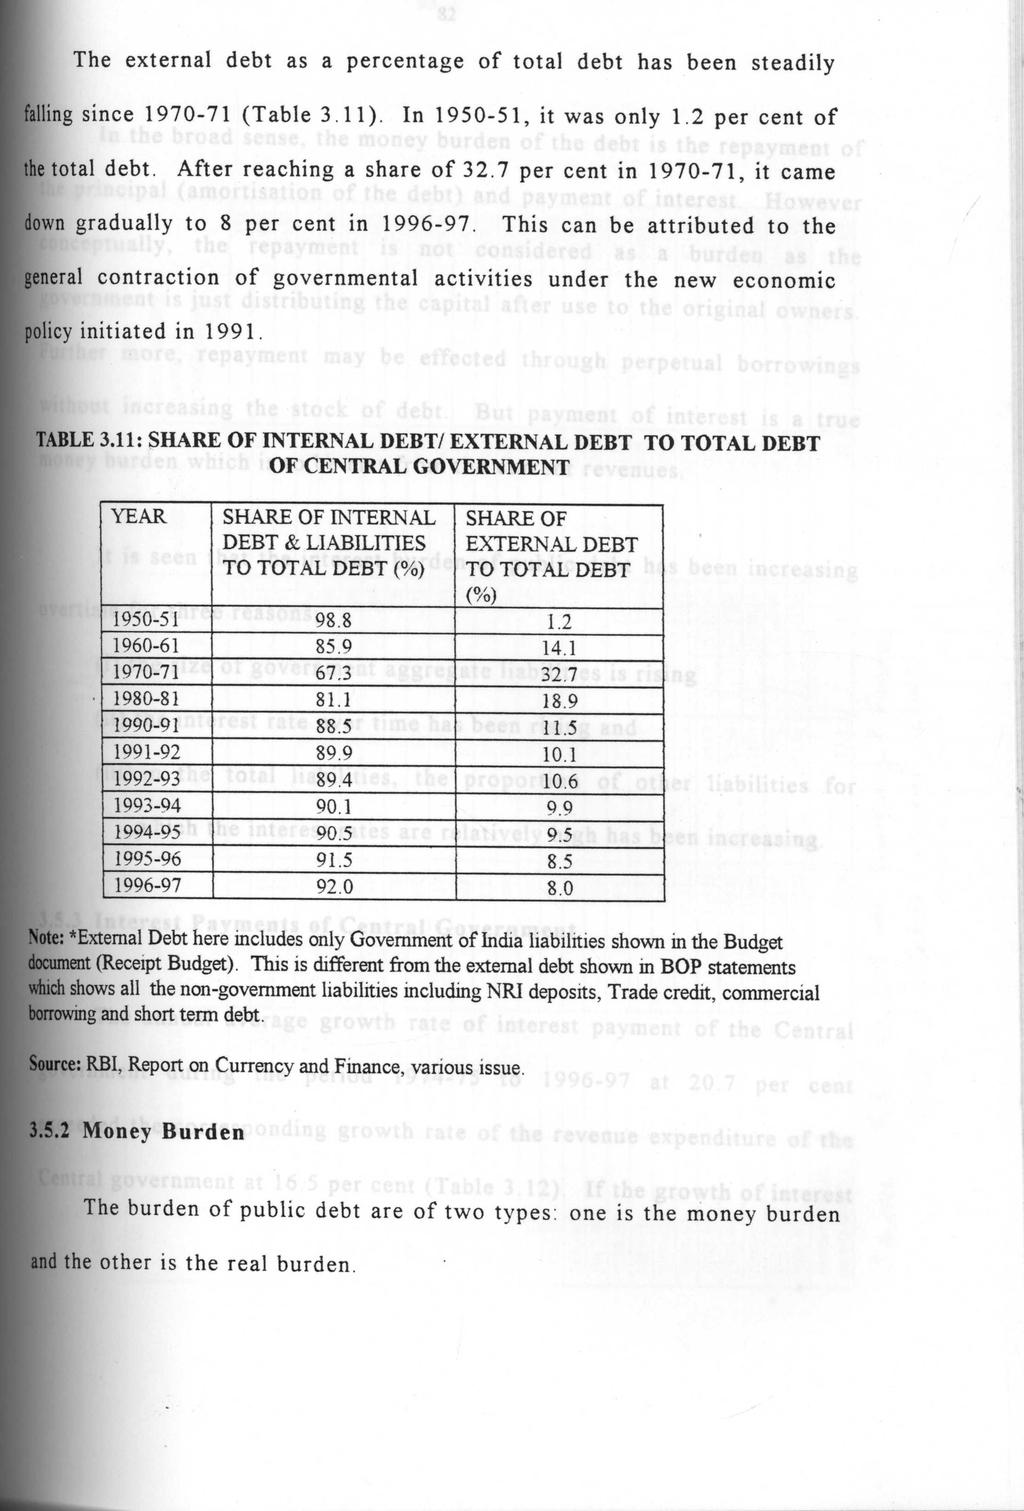 The external debt as a percentage of total debt has been steadily falling since 1970-71 (Table 3.11). In 1950-51, it was only 1.2 per cent of the total debt. After reaching a share of 32.